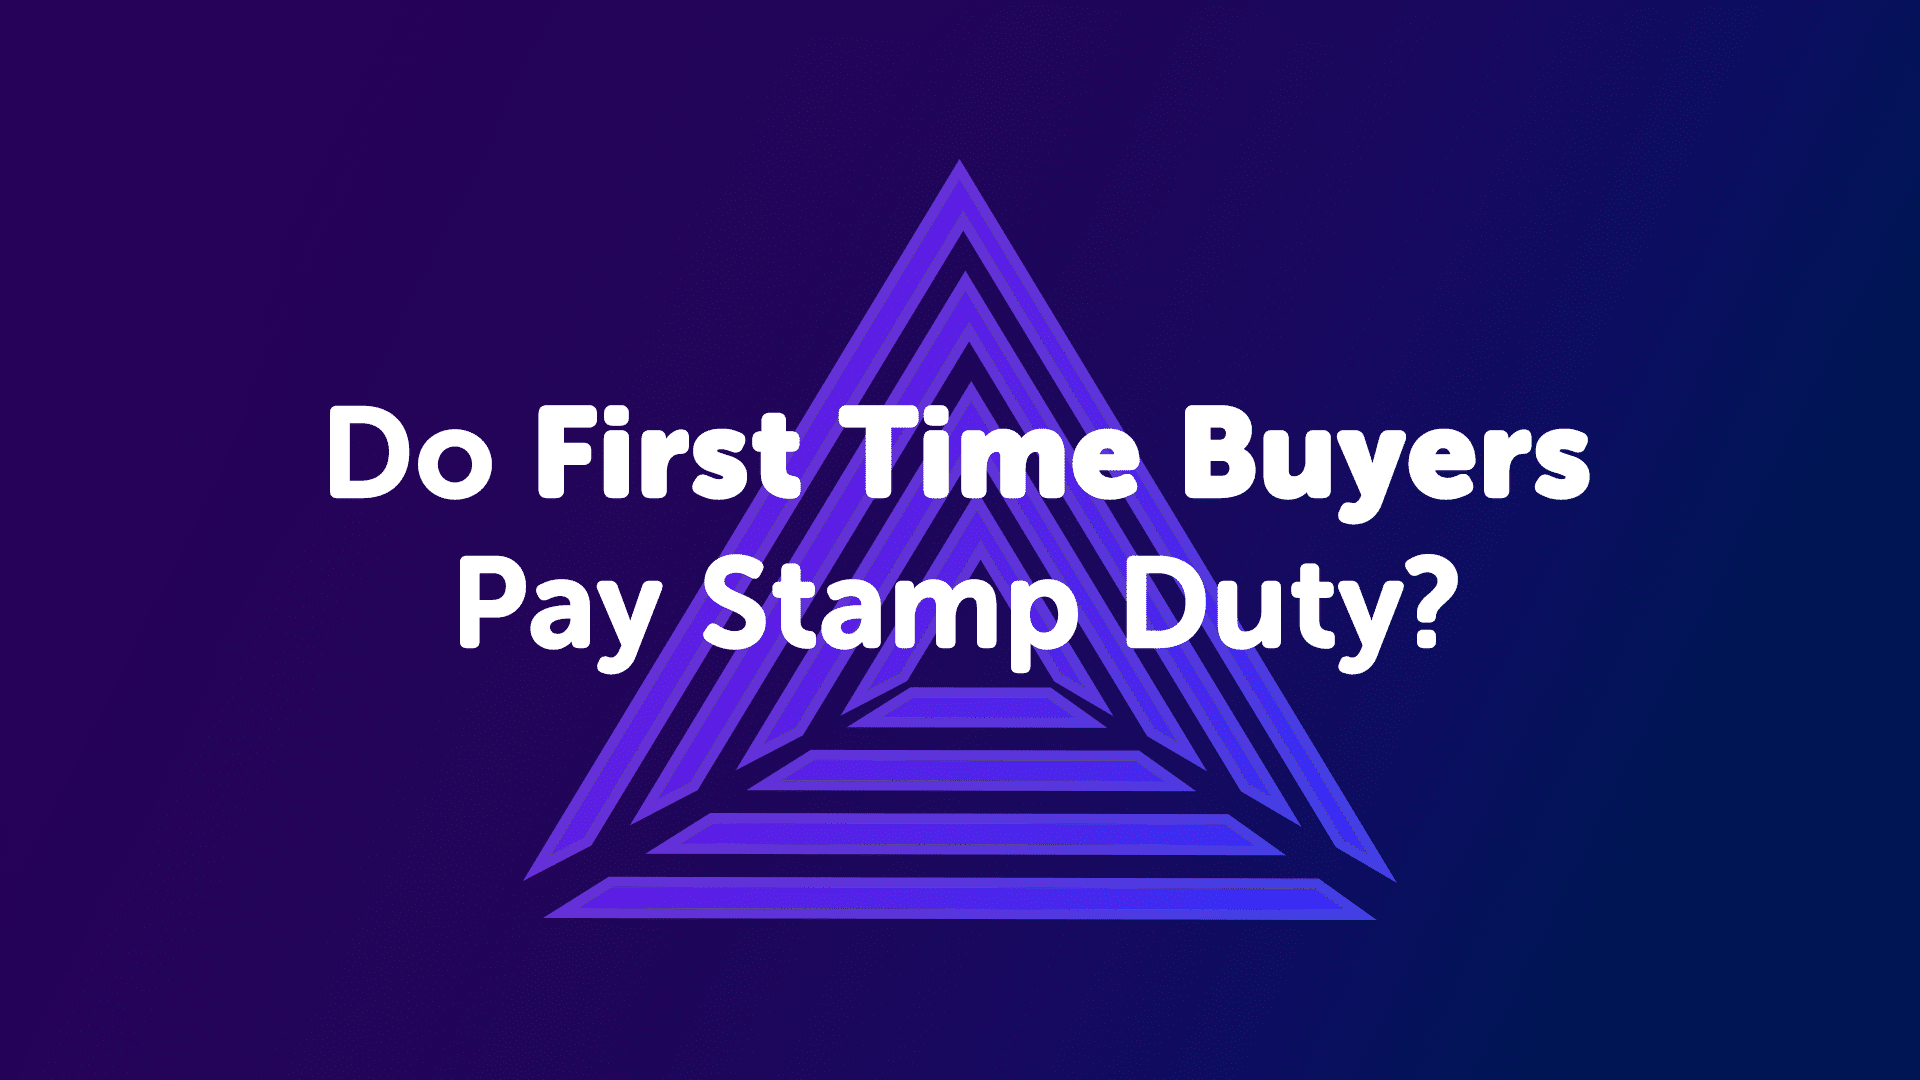 Do First Time Buyers Pay Stamp Duty in Durham